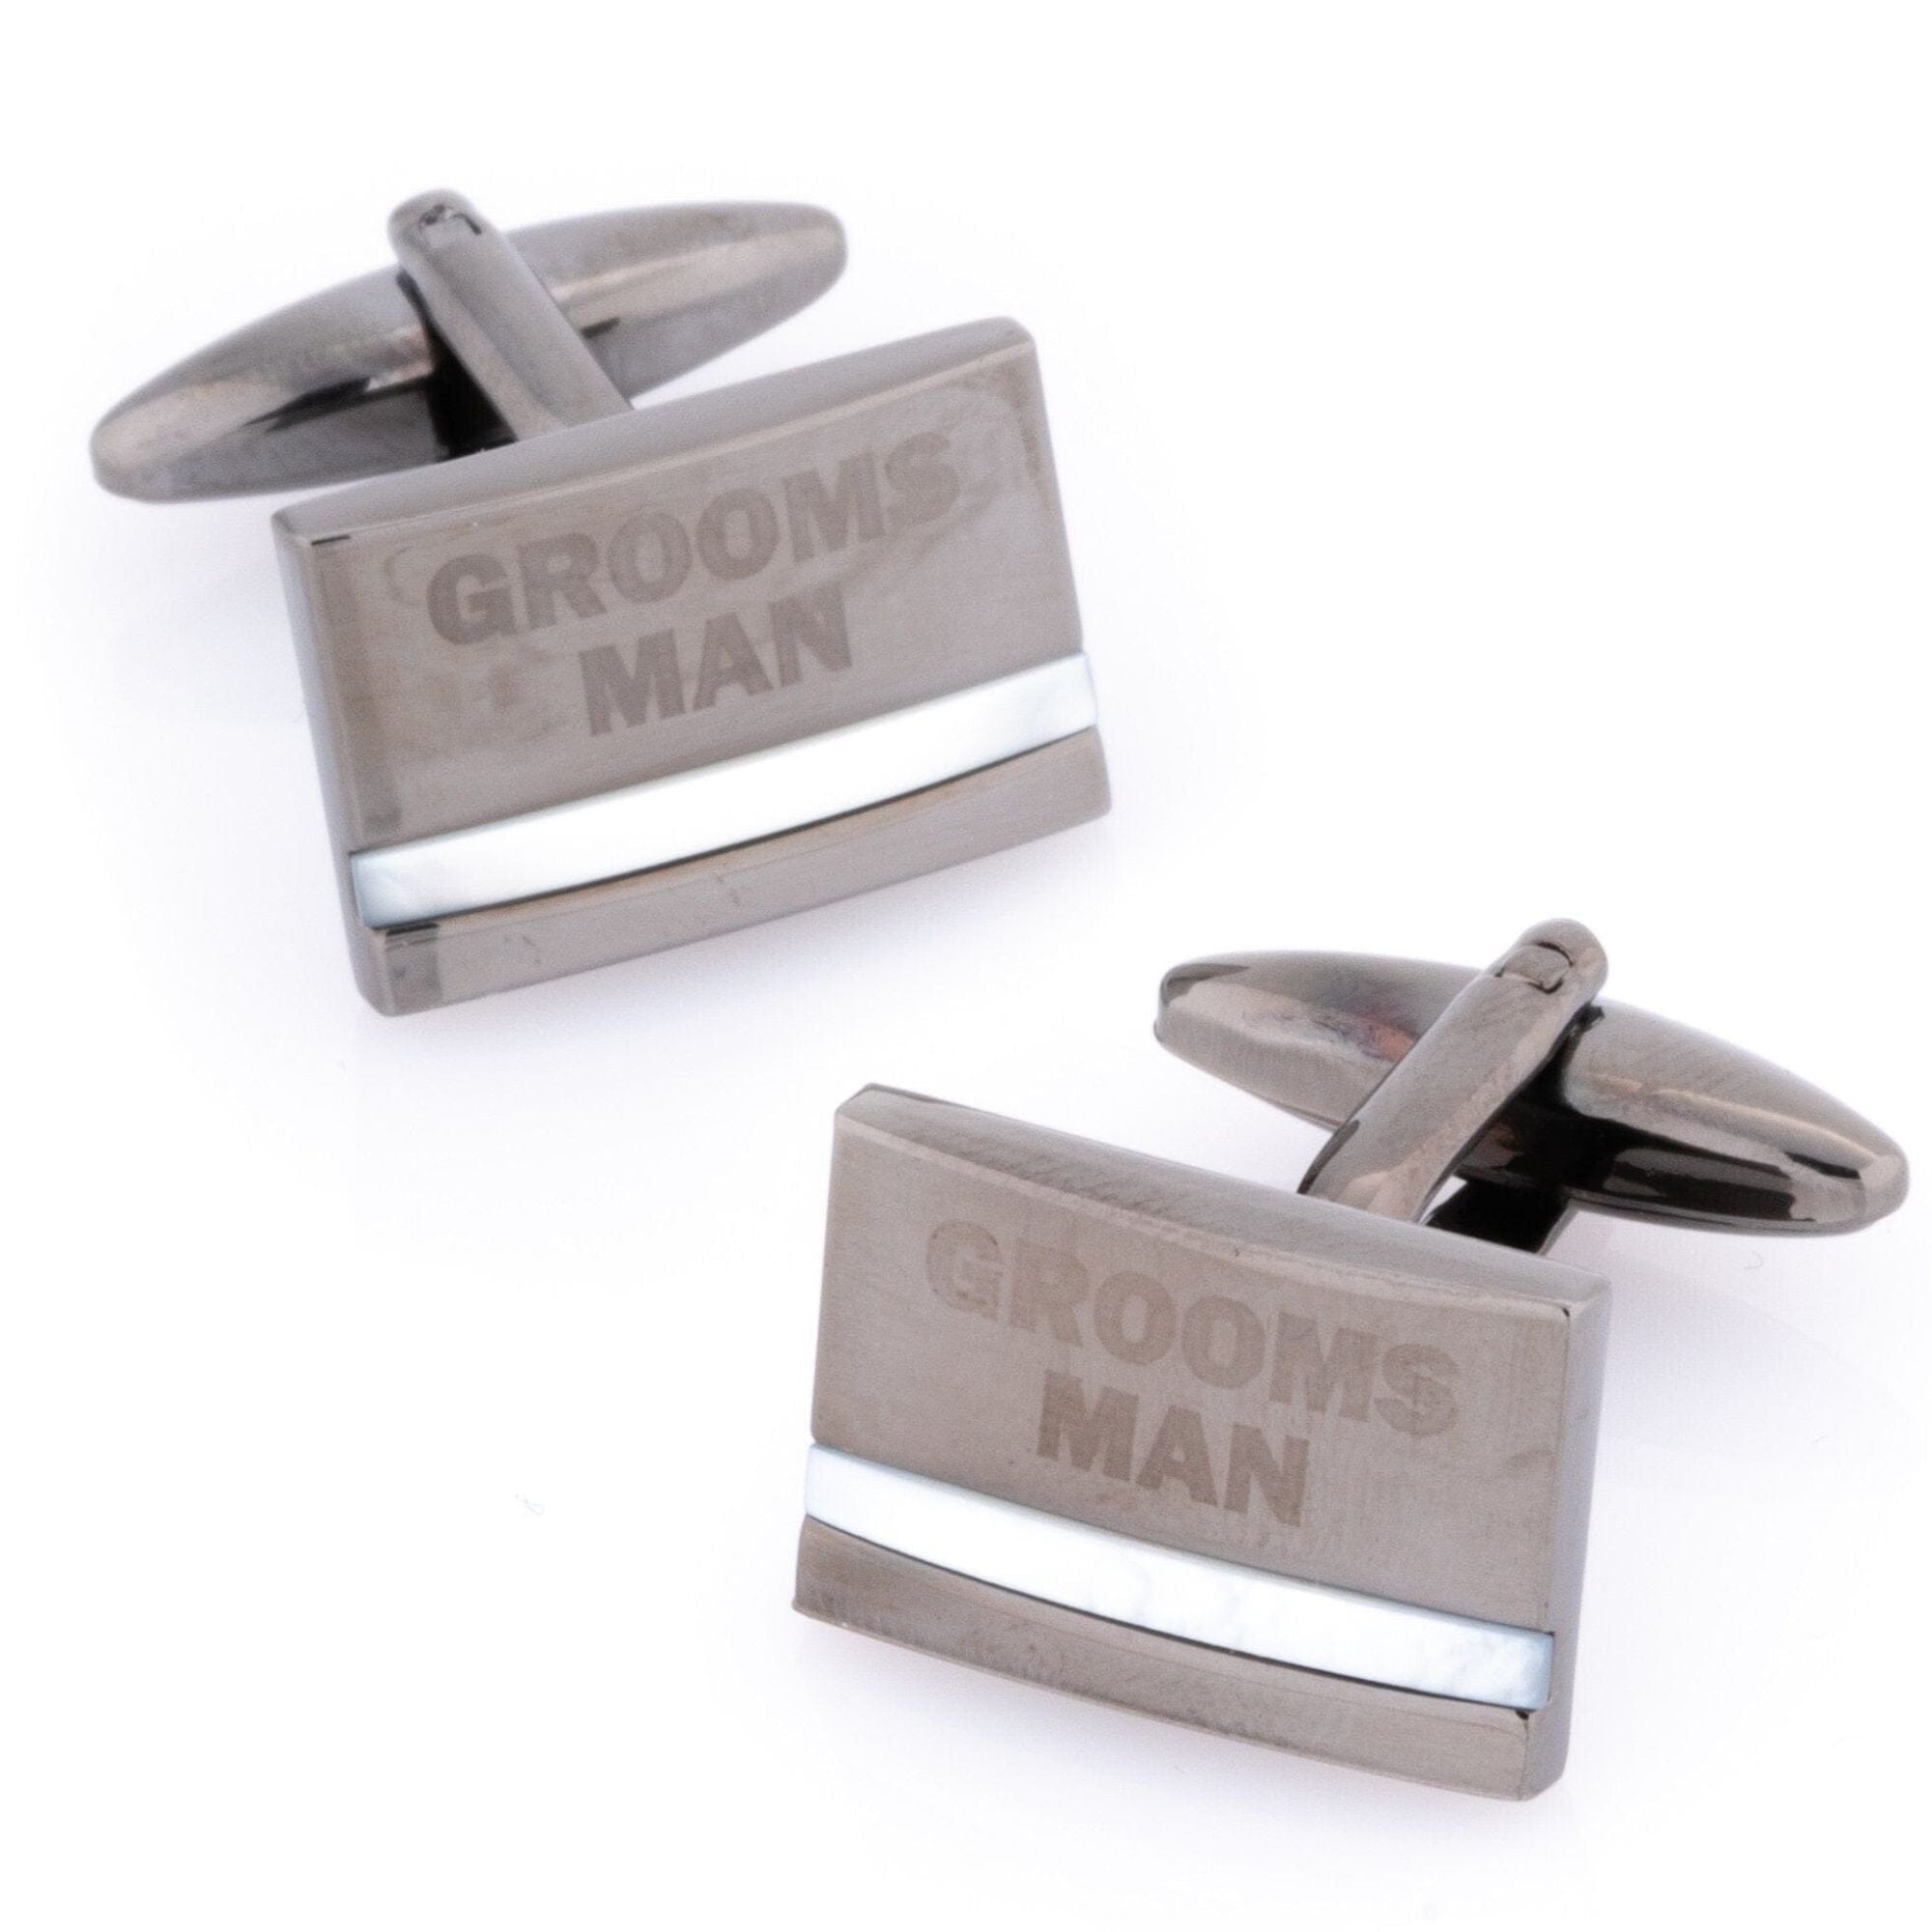 Groomsman Laser Etched Mother of Pearl Gunmetal Wedding Cufflinks Wedding Cufflinks Clinks Australia Groomsman Laser Etched Mother of Pearl Gunmetal Cufflinks 